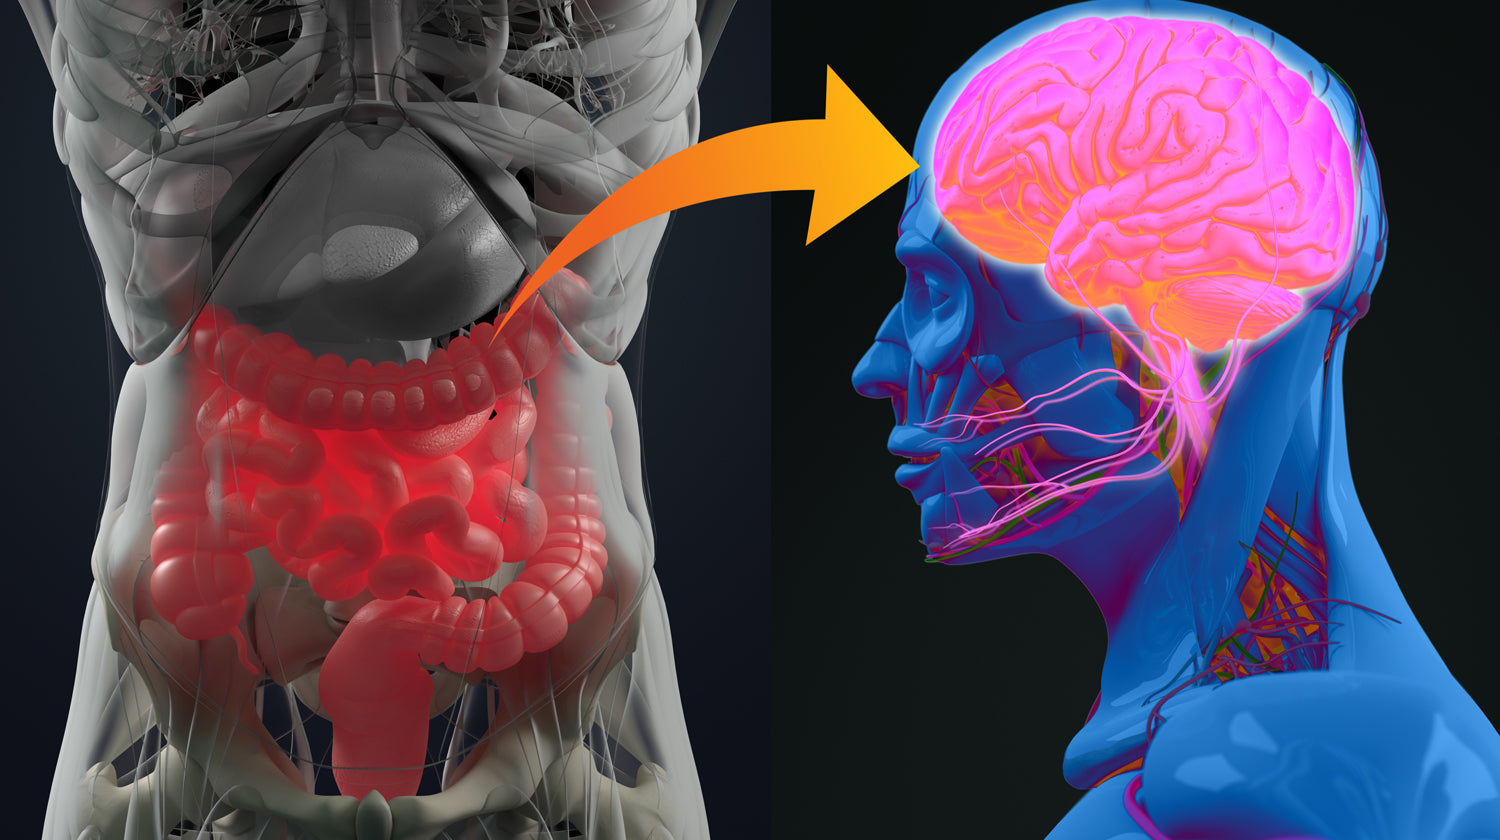 Role of the Gut-Brain Axis and Your Health